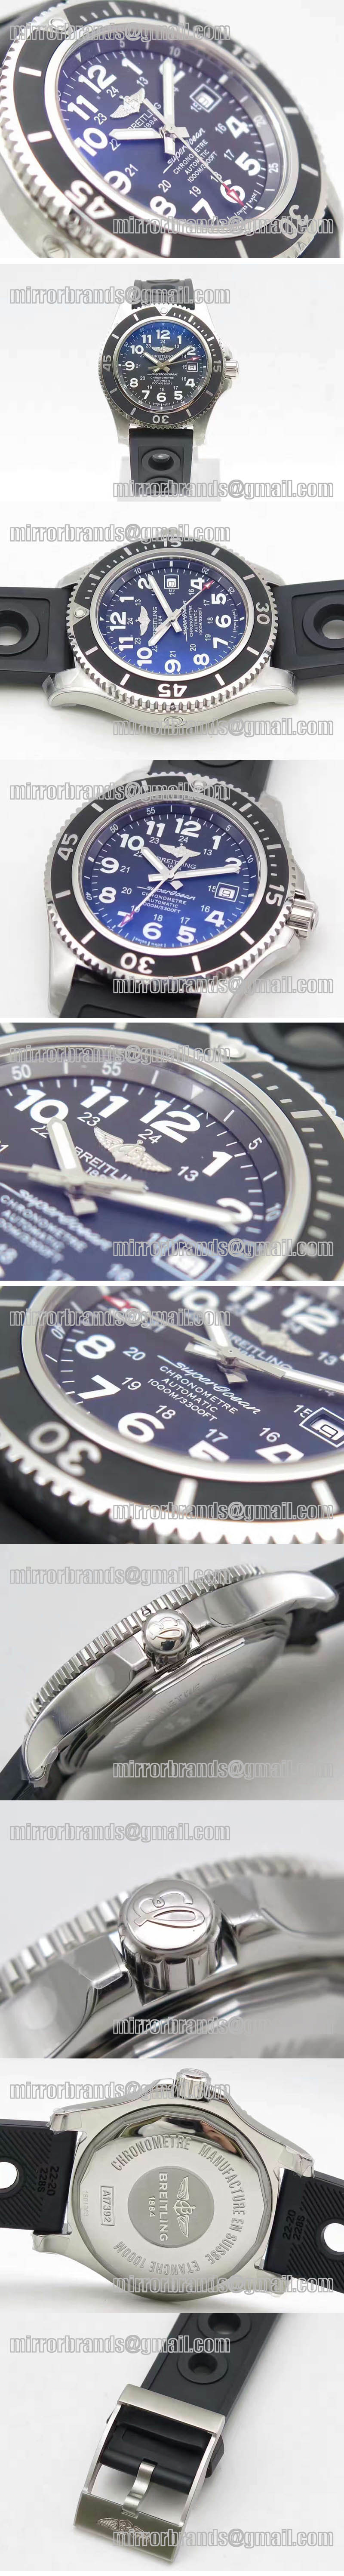 Replica Breitling Watches